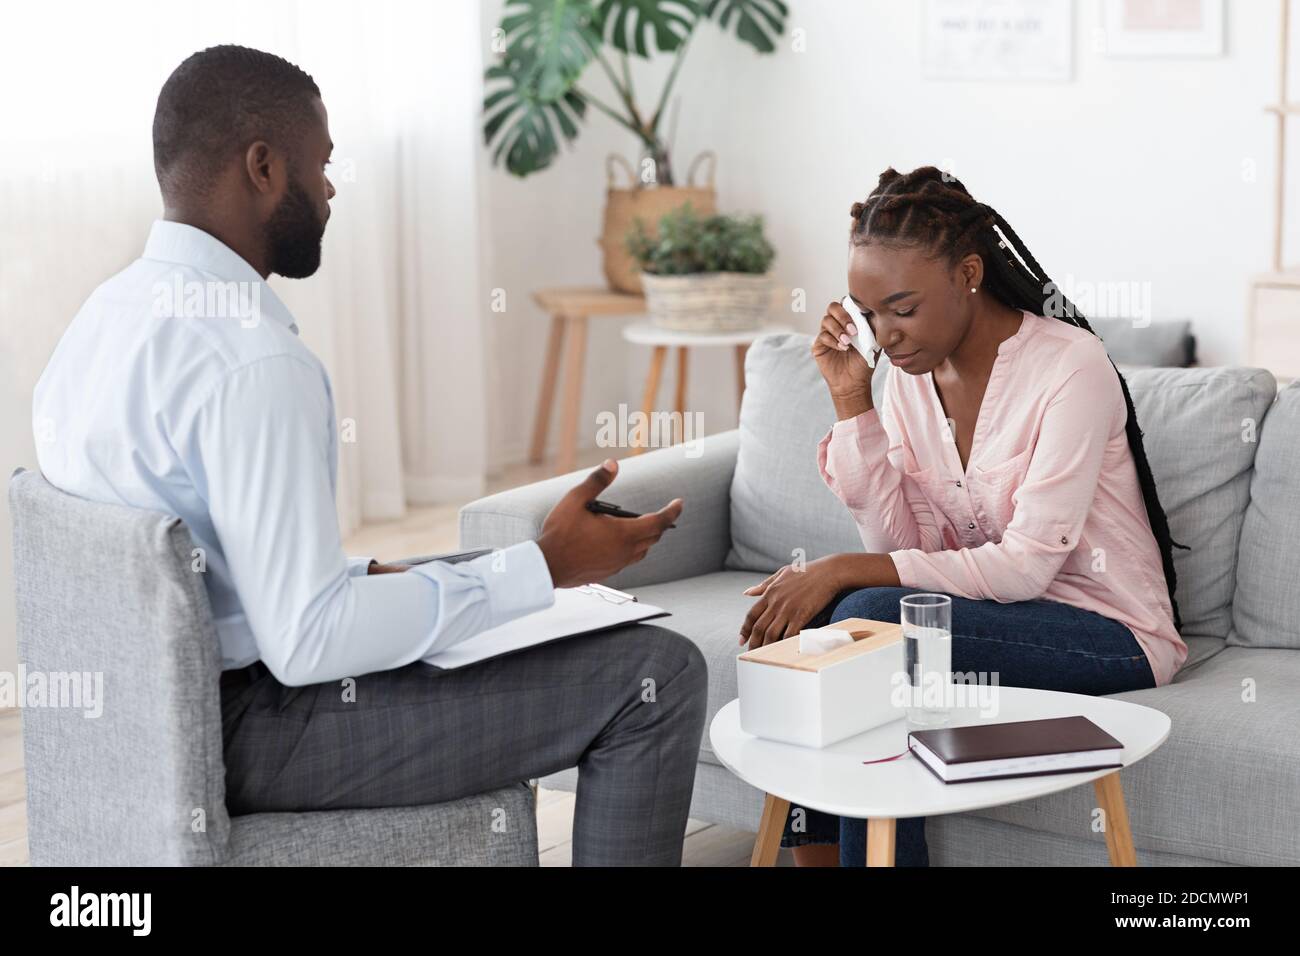 Black Psychologist Talking To Crying Woman During Therapy Session At His Office Stock Photo